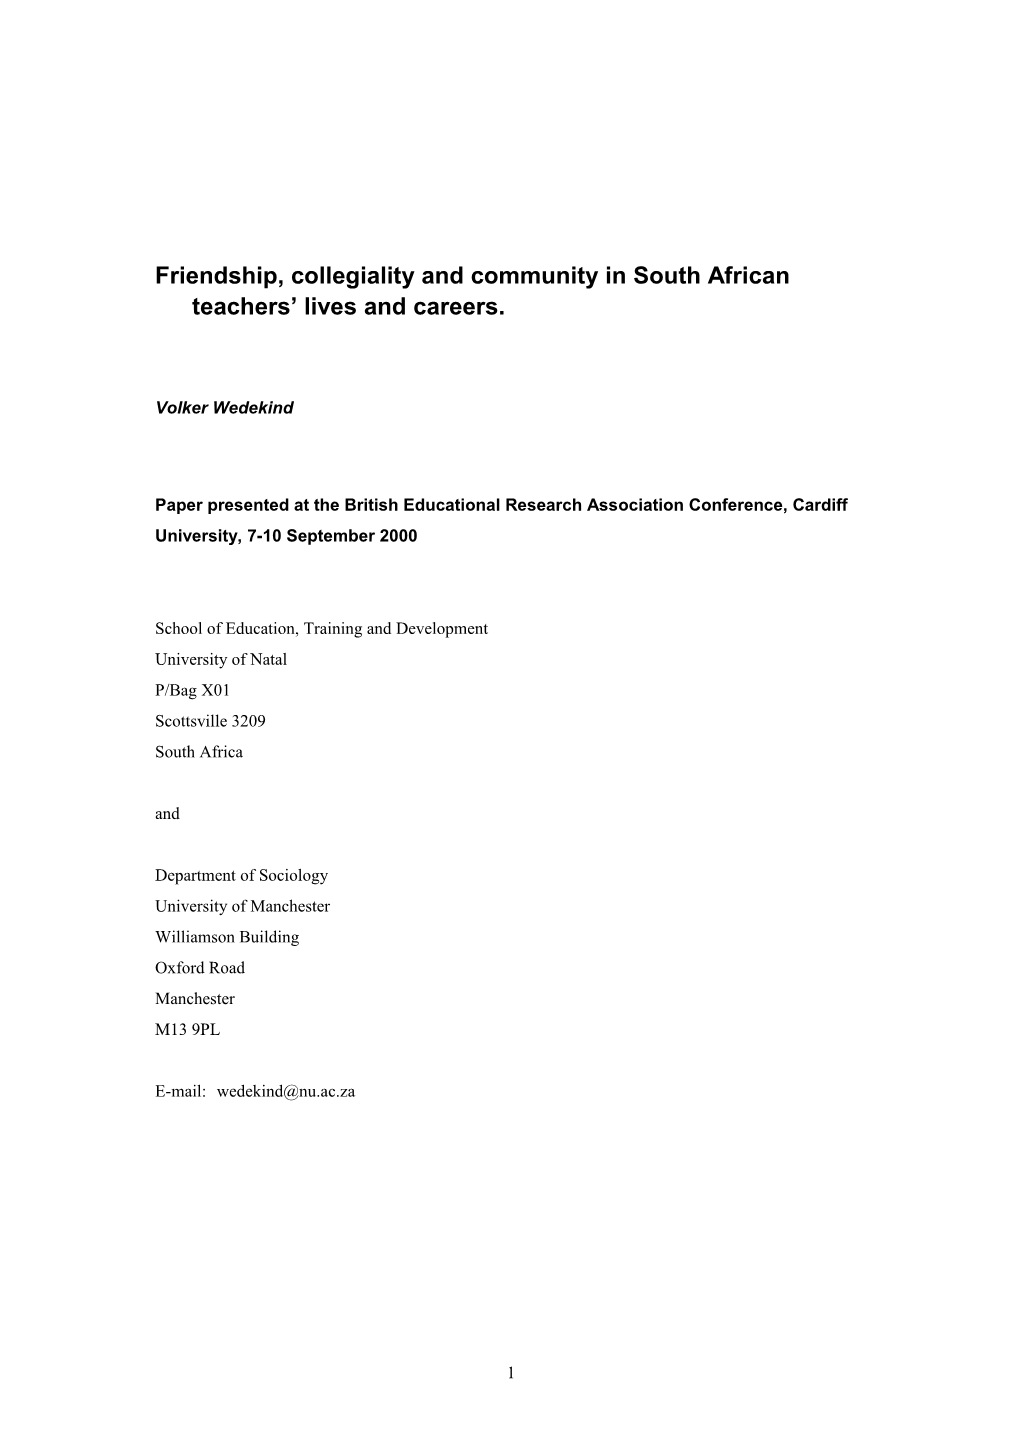 Friendship, Collegiality and Community in South African Teachers Lives and Careers